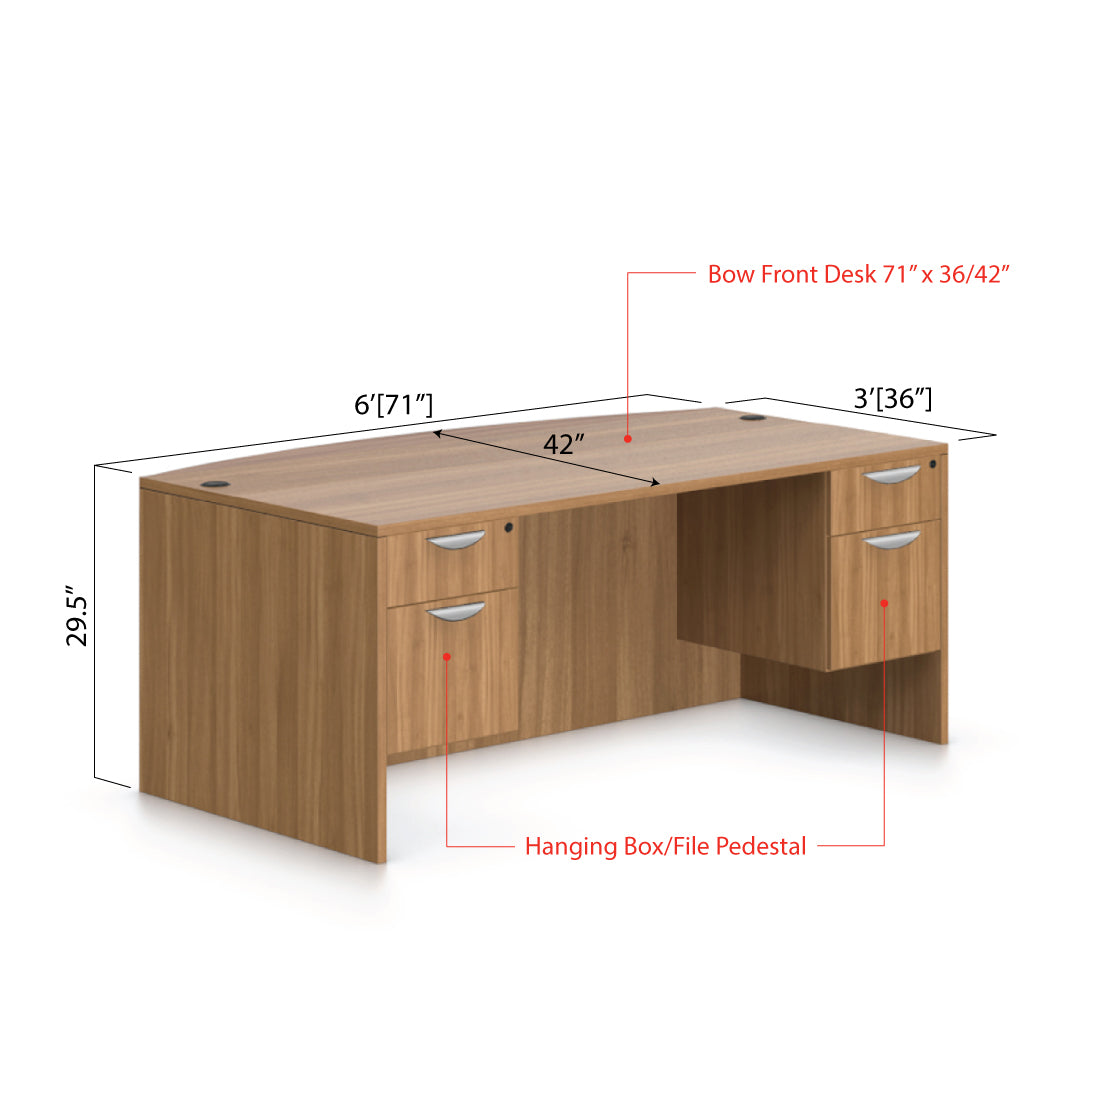 71"x42" Bow Front Desk with Two Hanging B/F pedestal - Kainosbuy.com